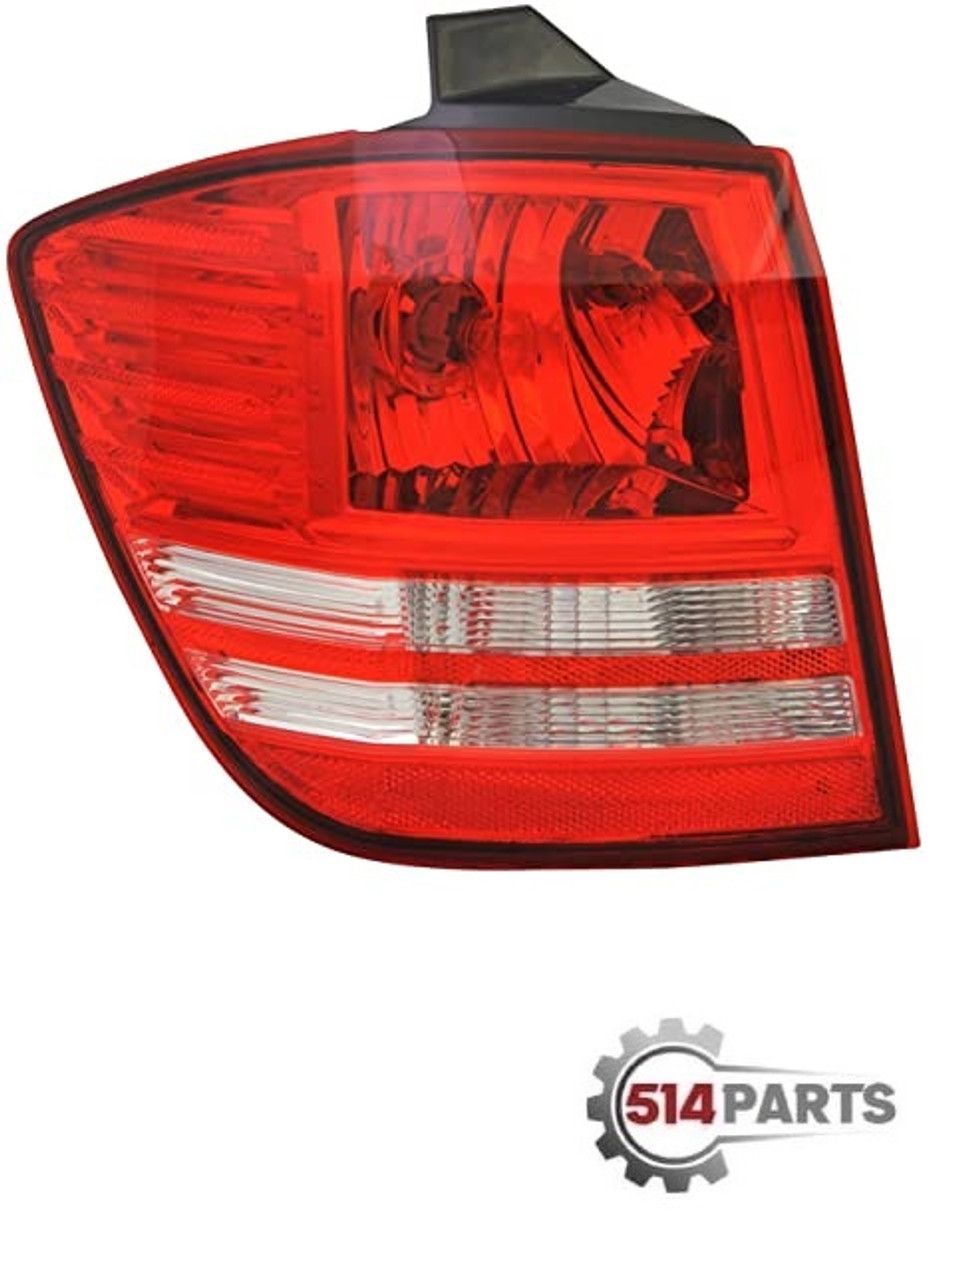 2010 - 2019 DODGE JOURNEY TAIL LIGHTS SINGLE BULB High Quality - PHARES ARRIERE Haute Qualite